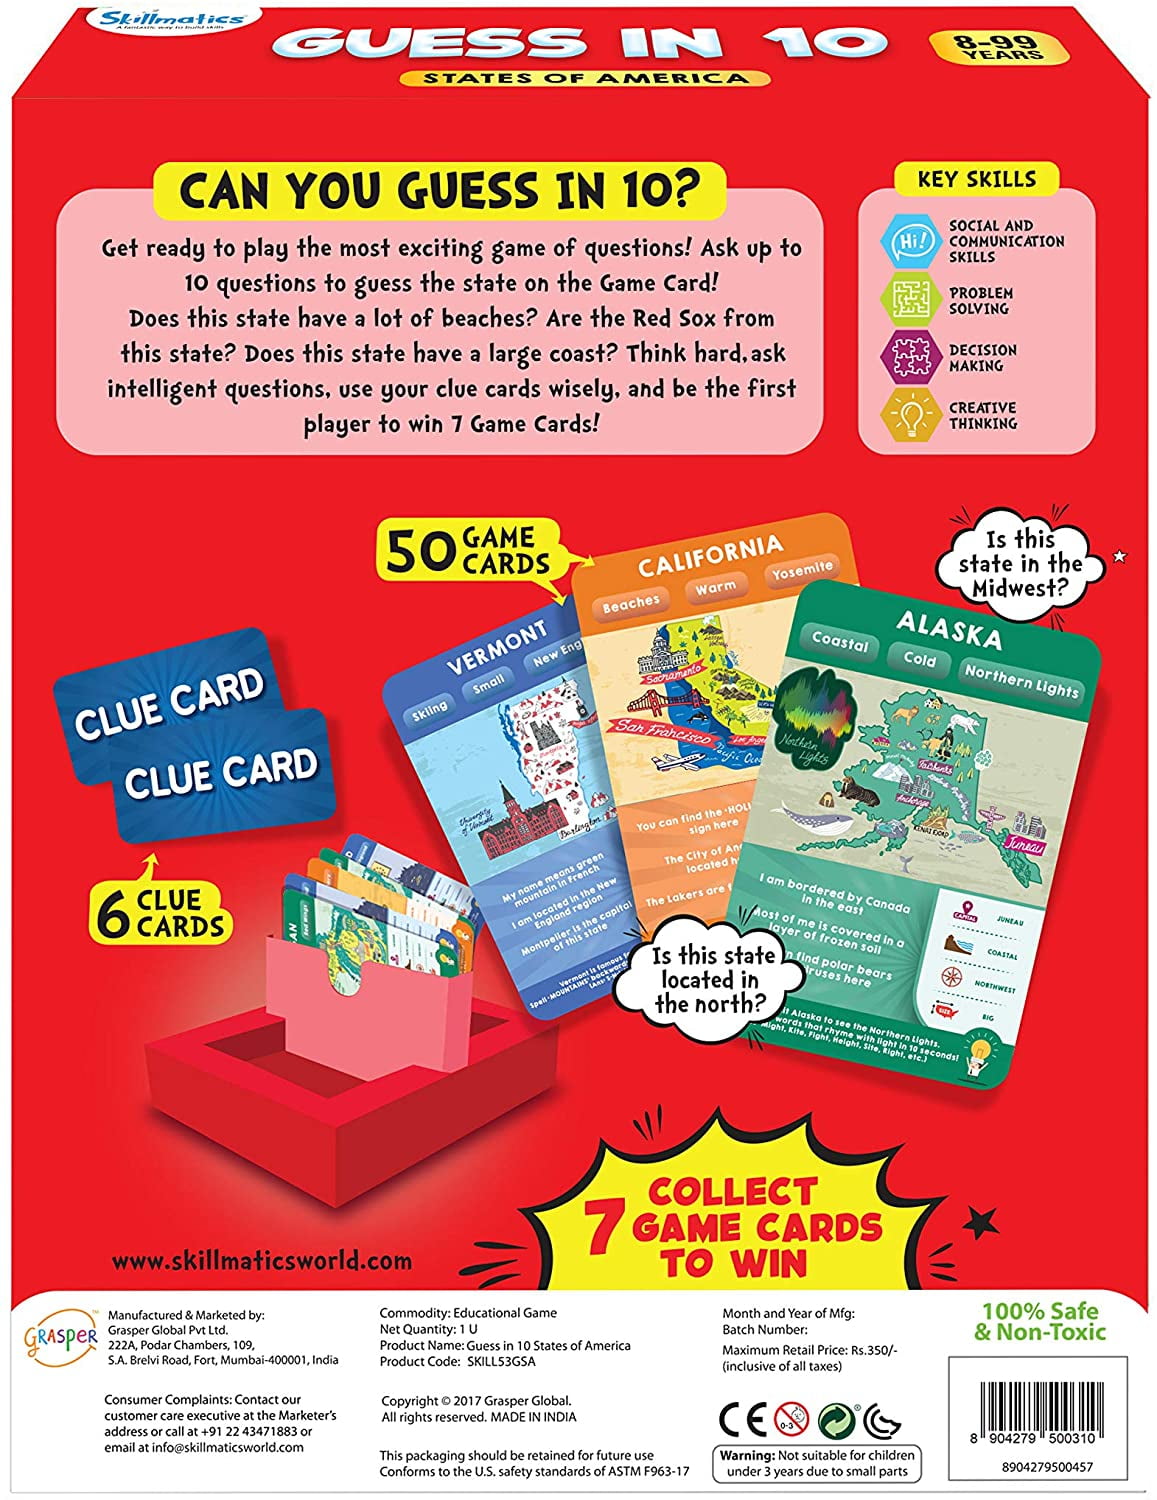 Skillmatics Guess in 10 States of America - Card Game Smart Questions for Kids & Super Fun & General Knowledge Family Game Night | Gifts for Kids (Ages 8-99) - Walmart.com